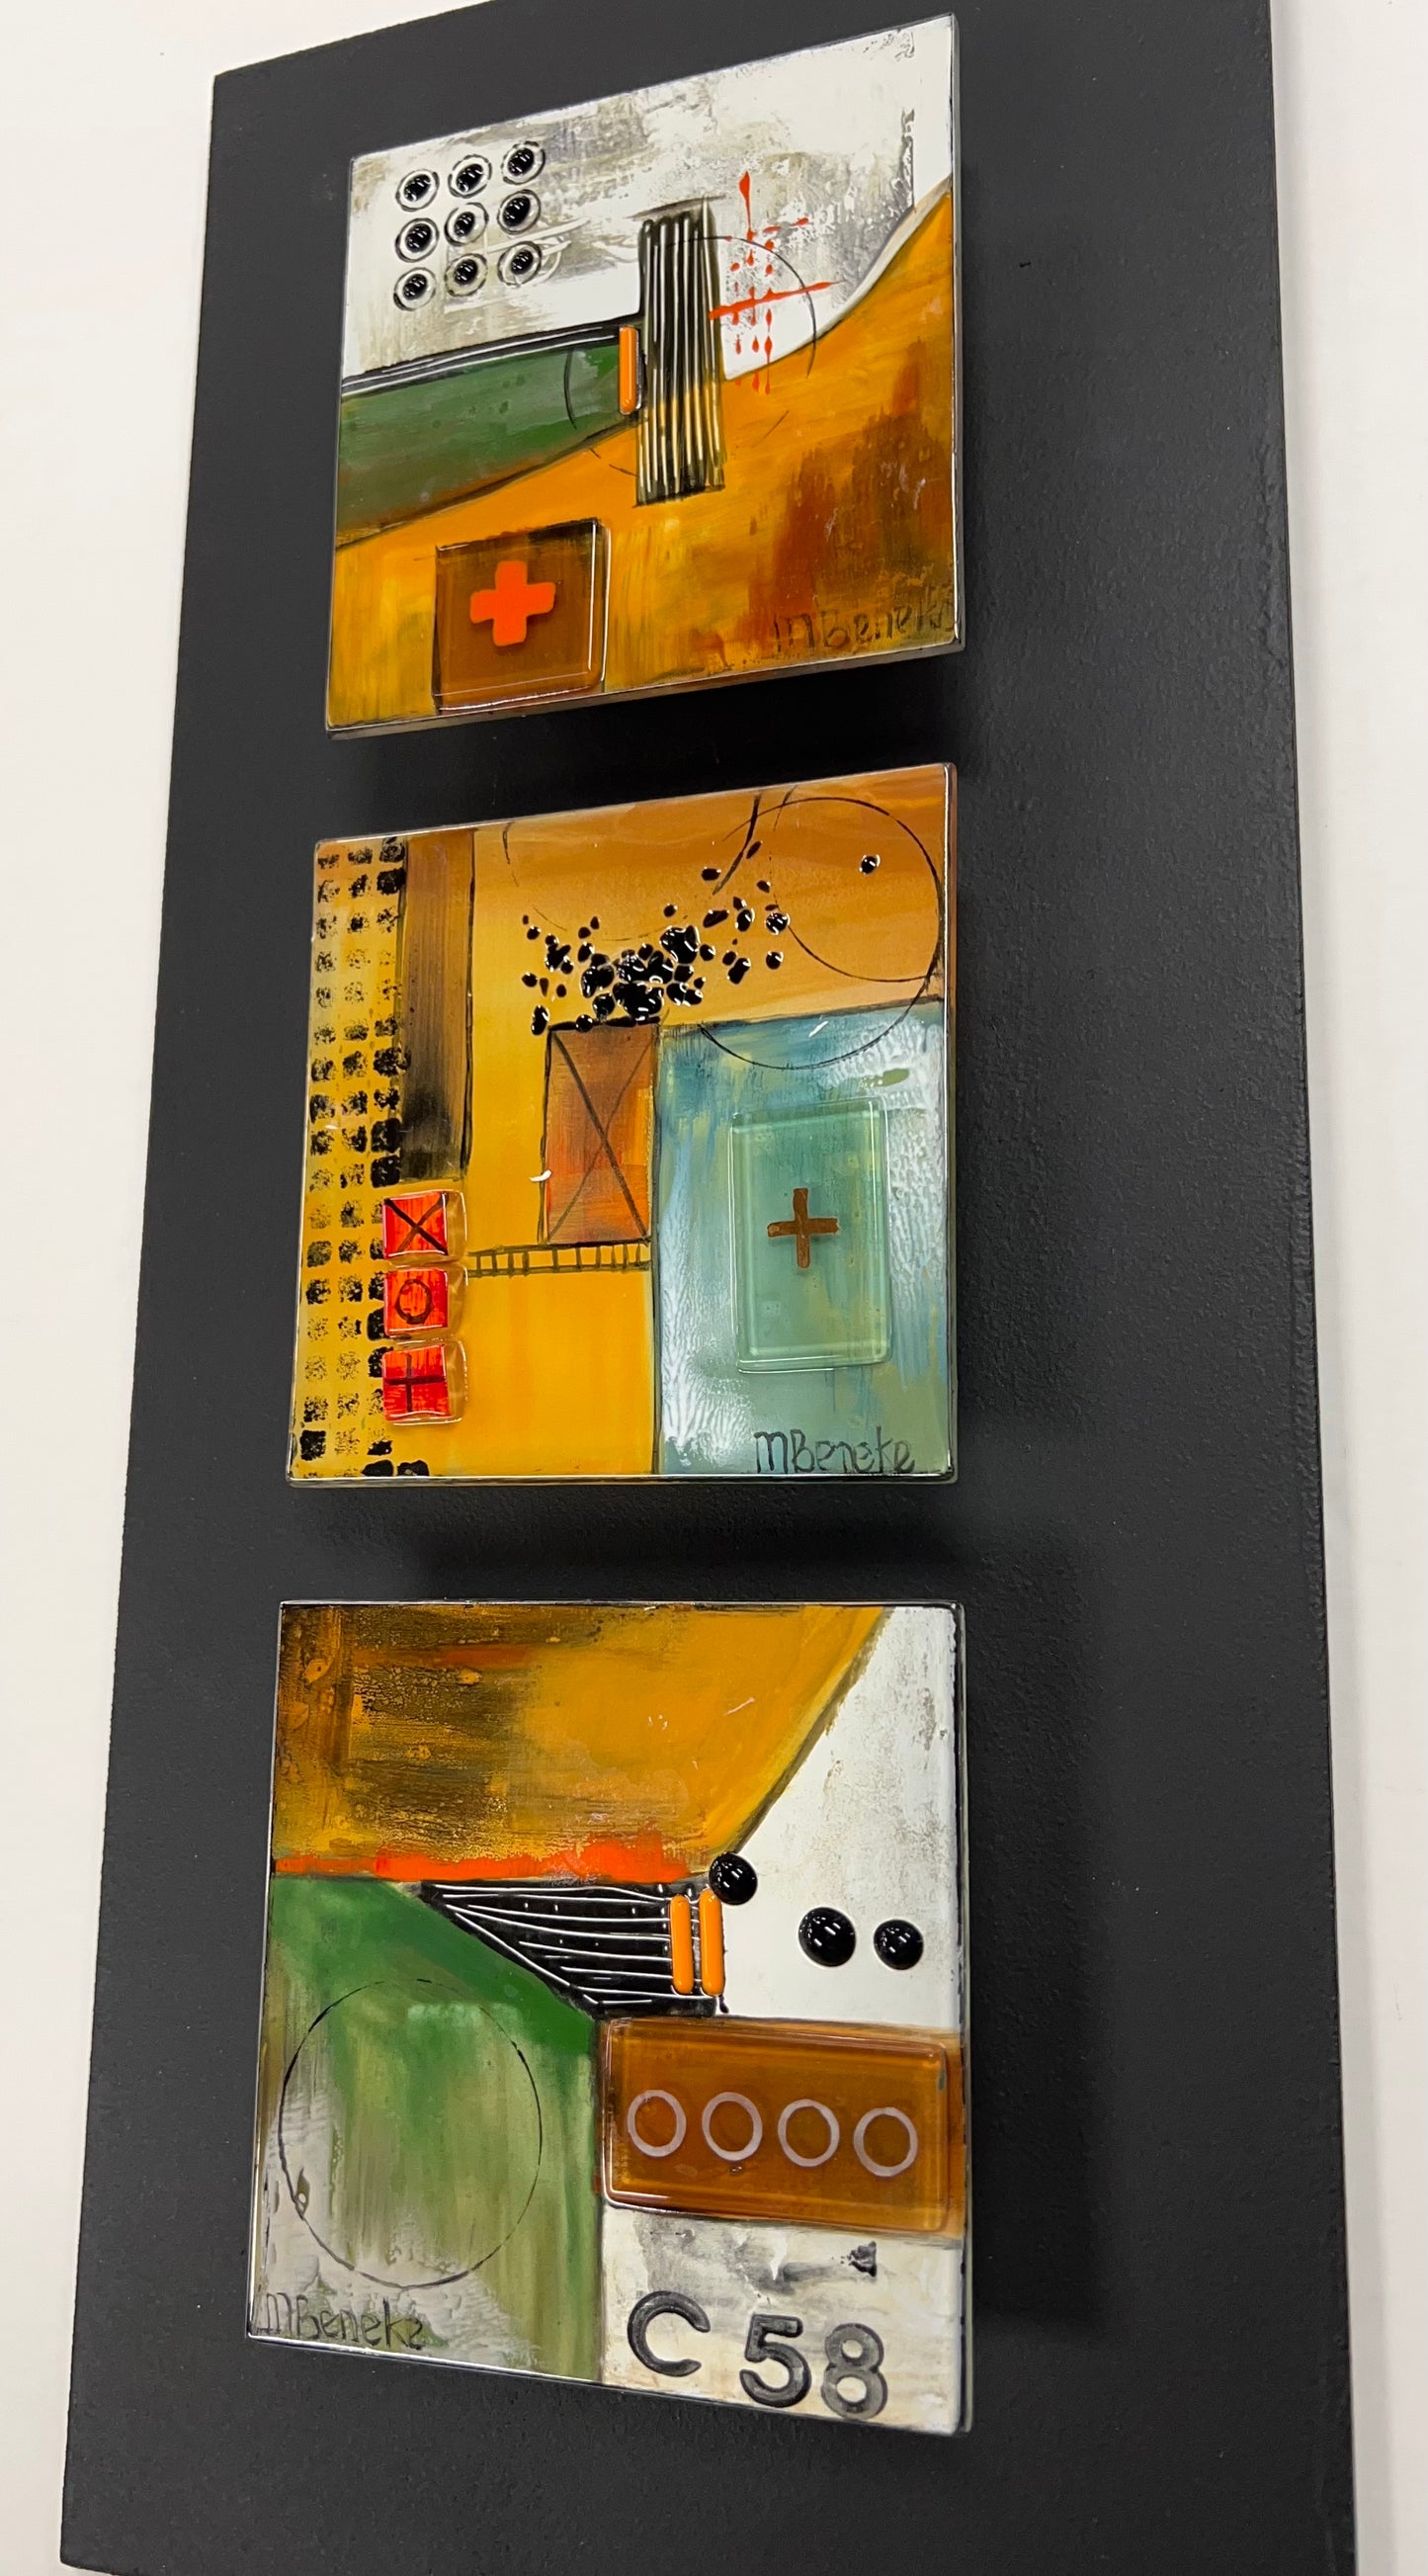 Marguerite Beneke - Gallery - 16 x 8 Wall Mounted 3 x 4x4 Inch Tiles